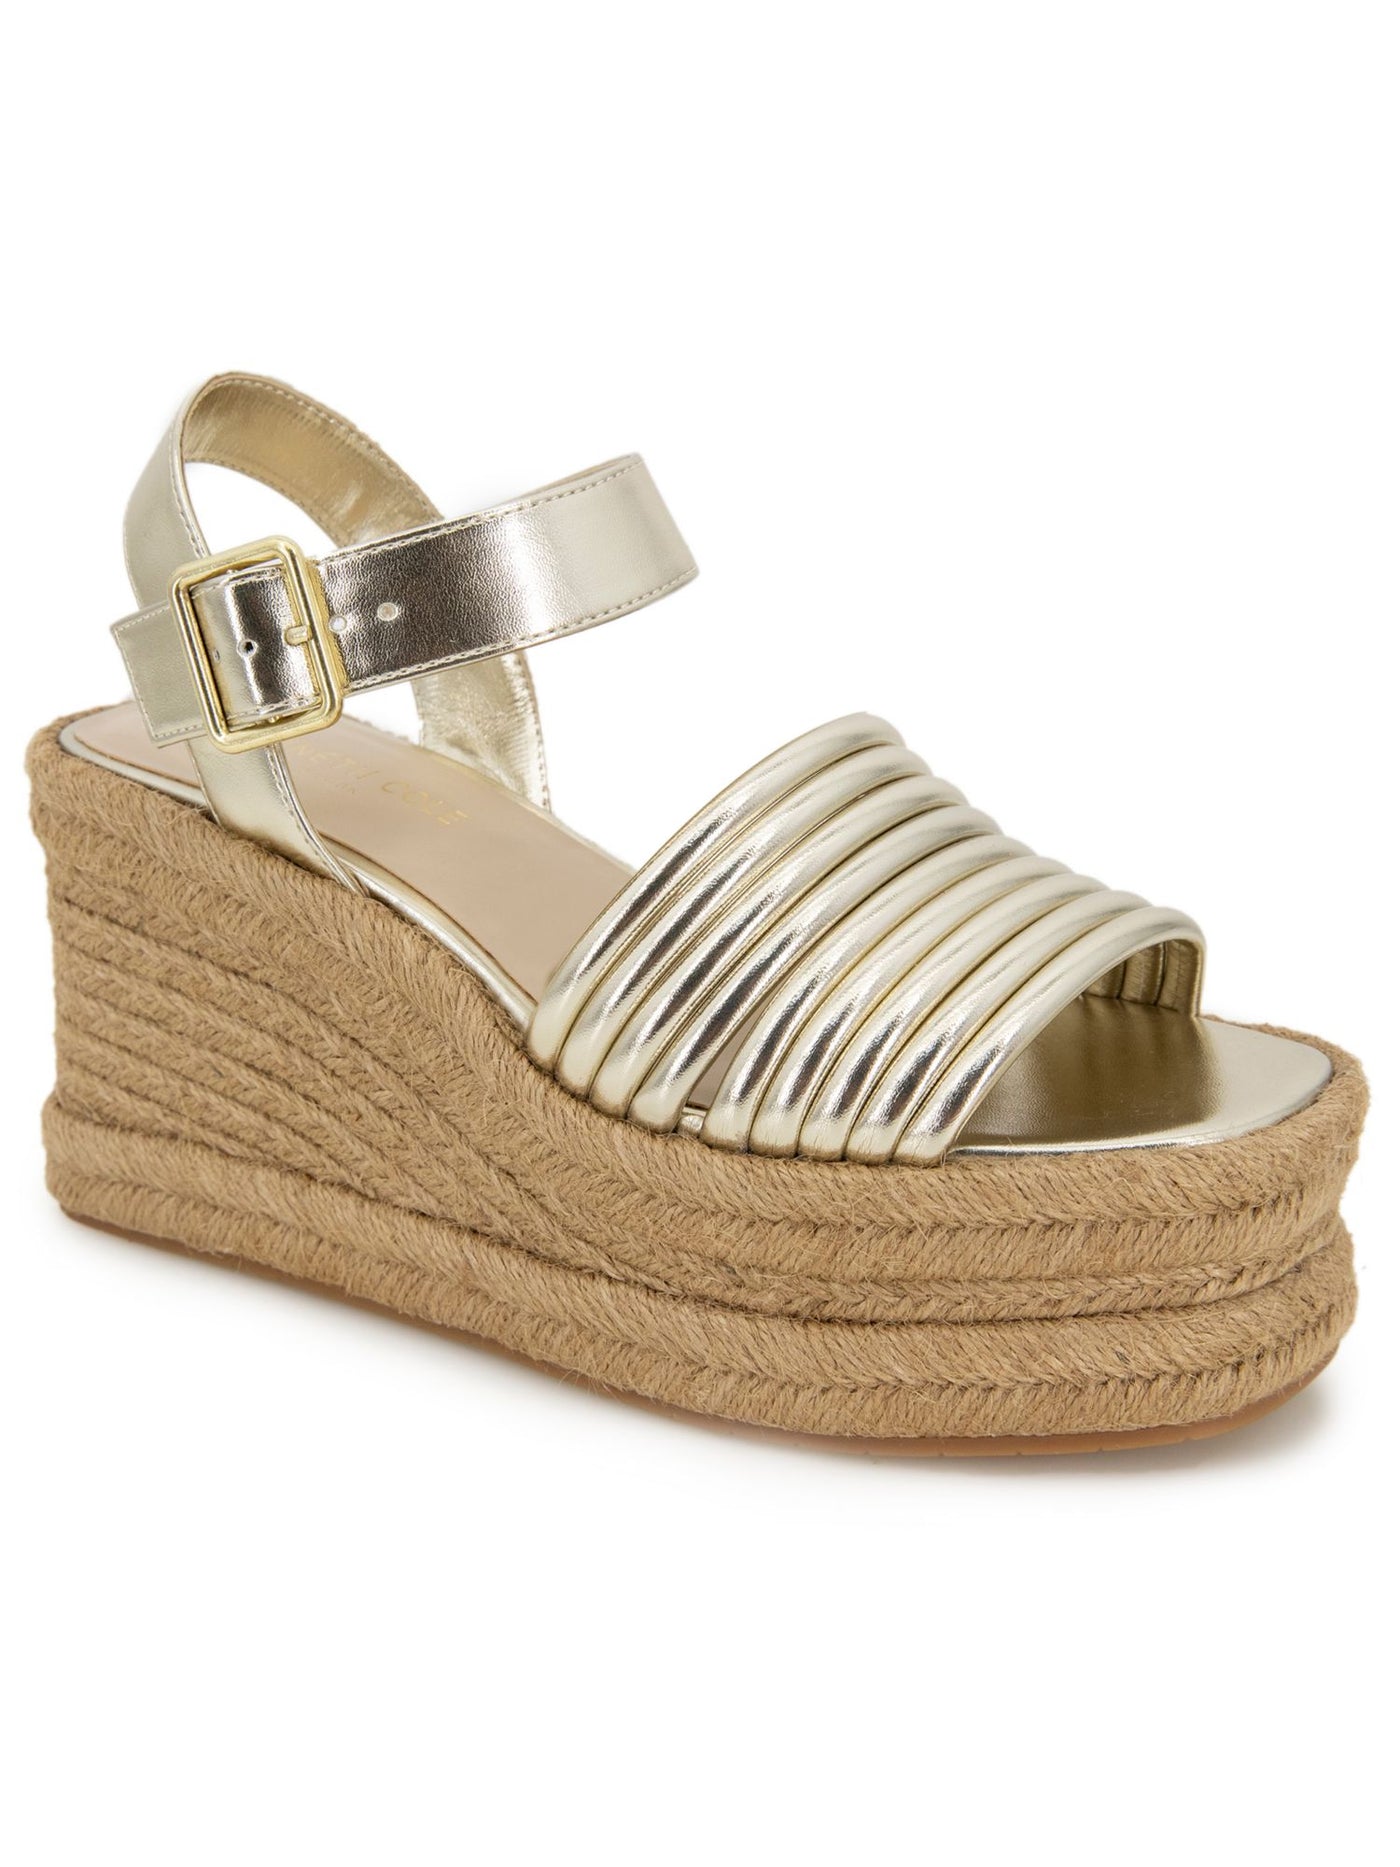 KENNETH COLE NEW YORK Womens Gold 2 Wedge Adjustable Ankle Strap Strappy Padded Shelby Open Toe Wedge Buckle Espadrille Shoes 5.5 M